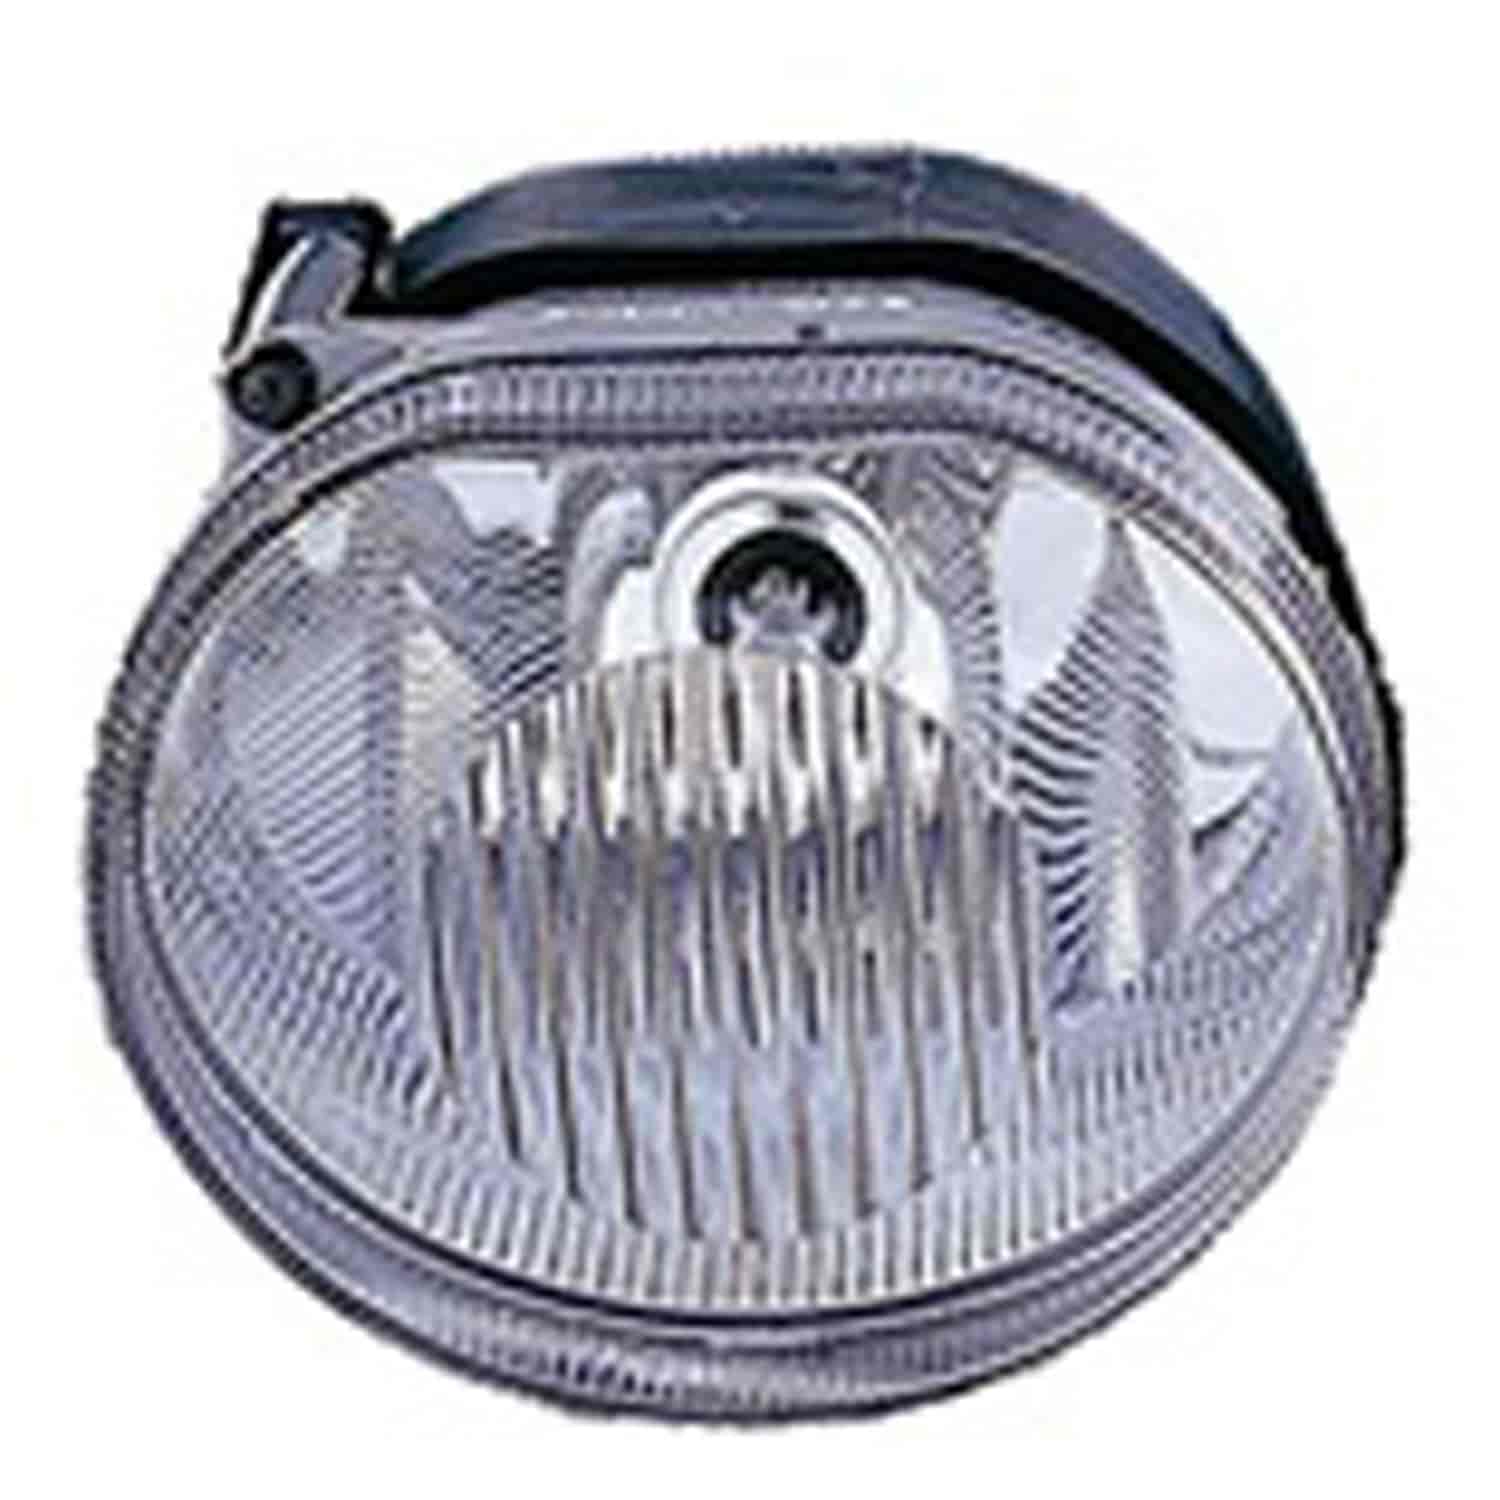 Replacement fog light from Omix-ADA, Fits right side on 02-04 Jeep Liberty KJ